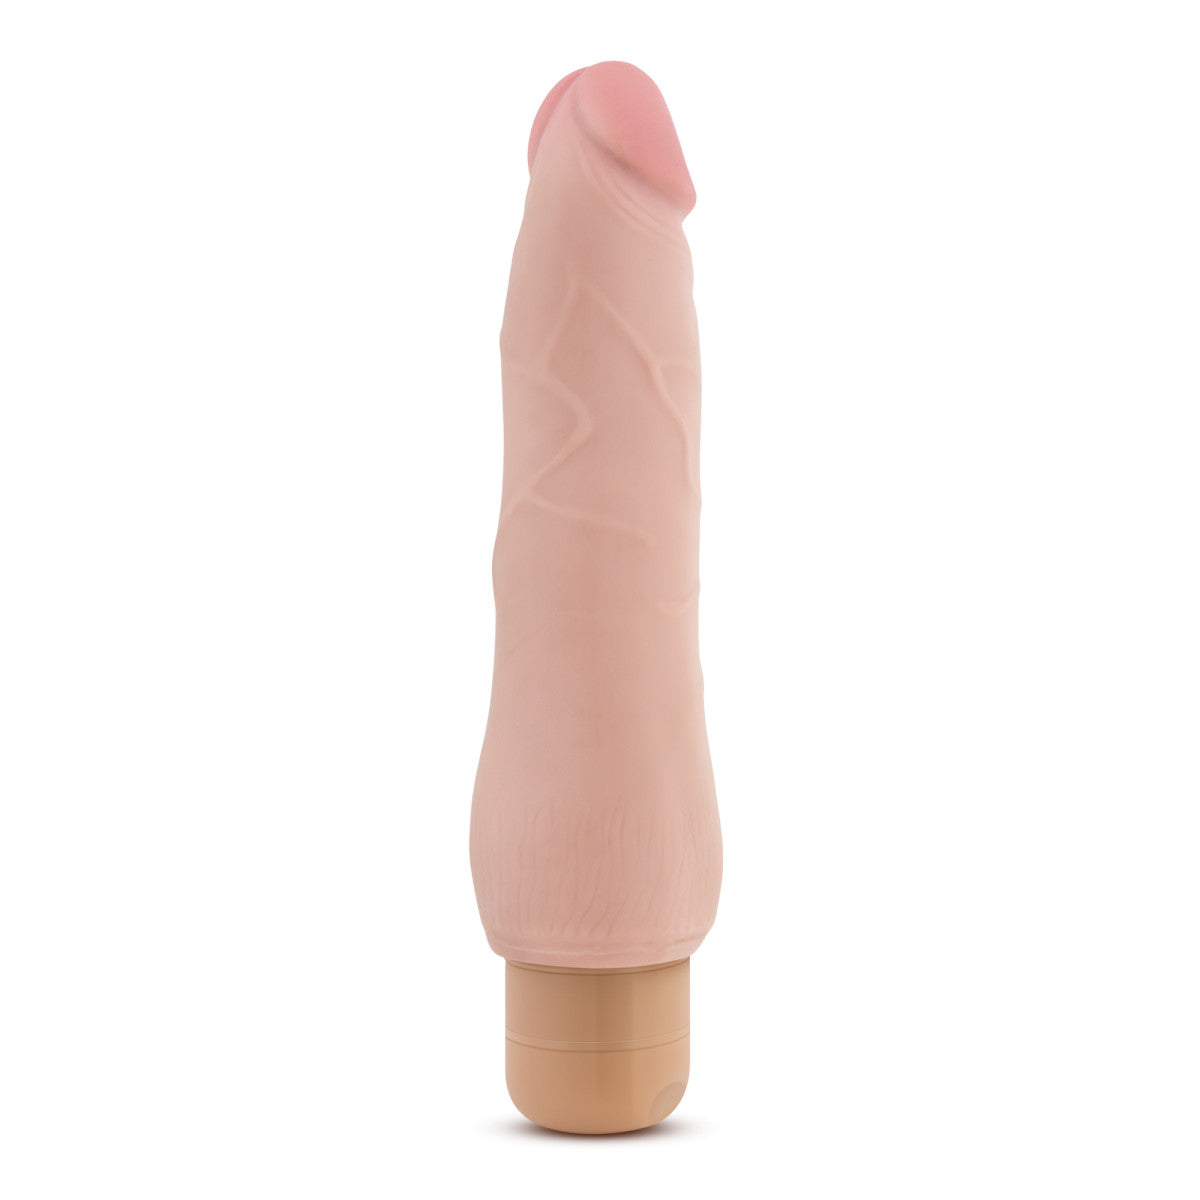 Vanilla skin tone realistic vibrating dildo. Defined pink head and subtle veins along the shaft. Twist dial on bottom to control intensity. Additional images show alternate angles.